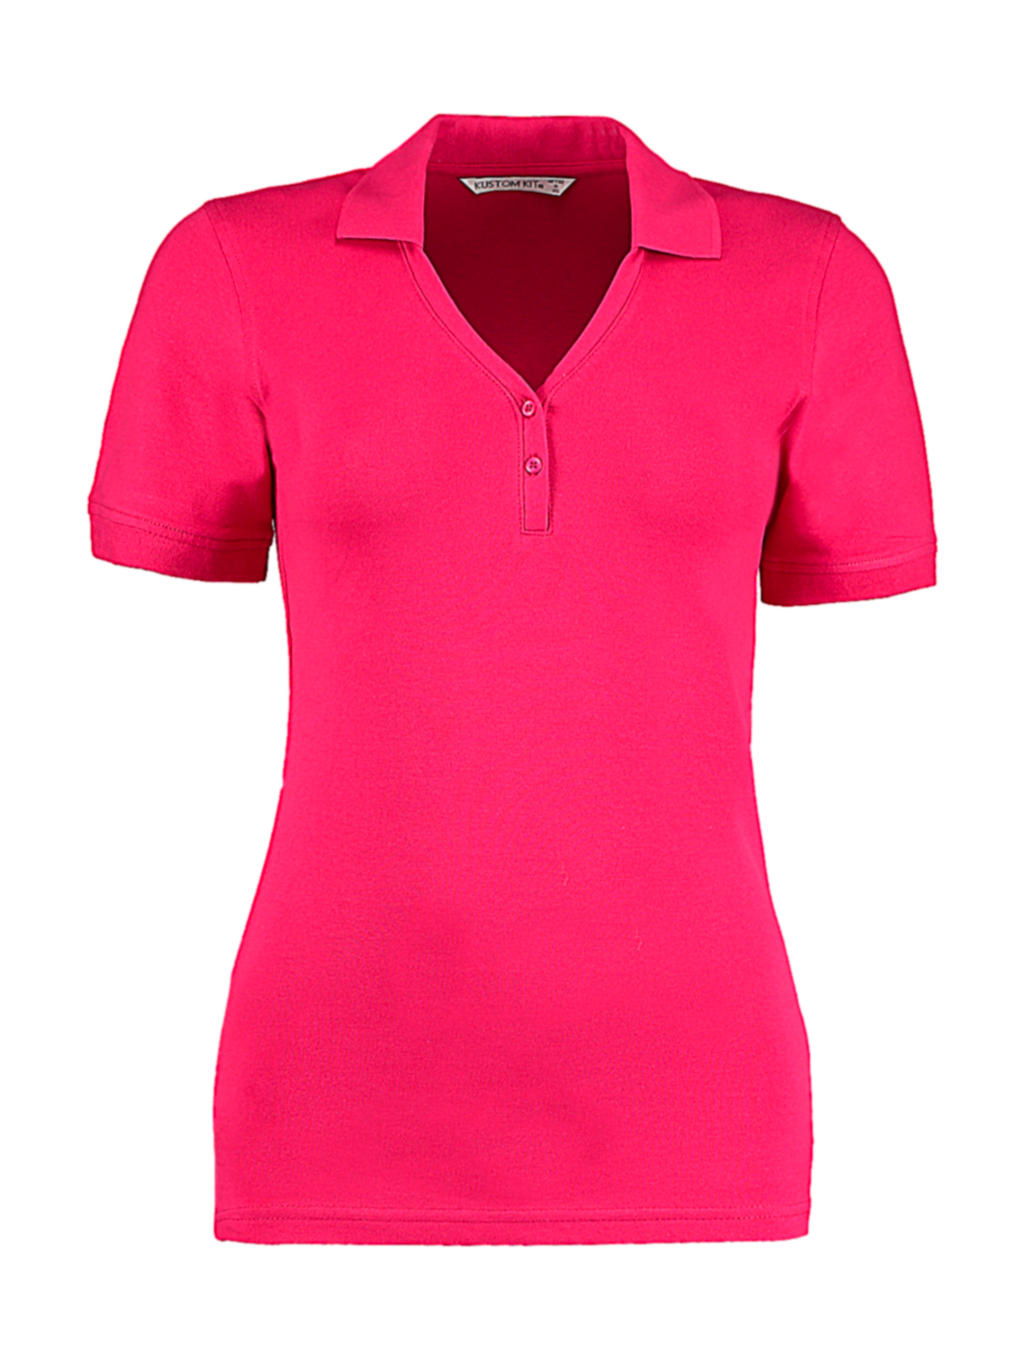  Womens Regular Fit Comfortec? V Neck Polo in Farbe Raspberry